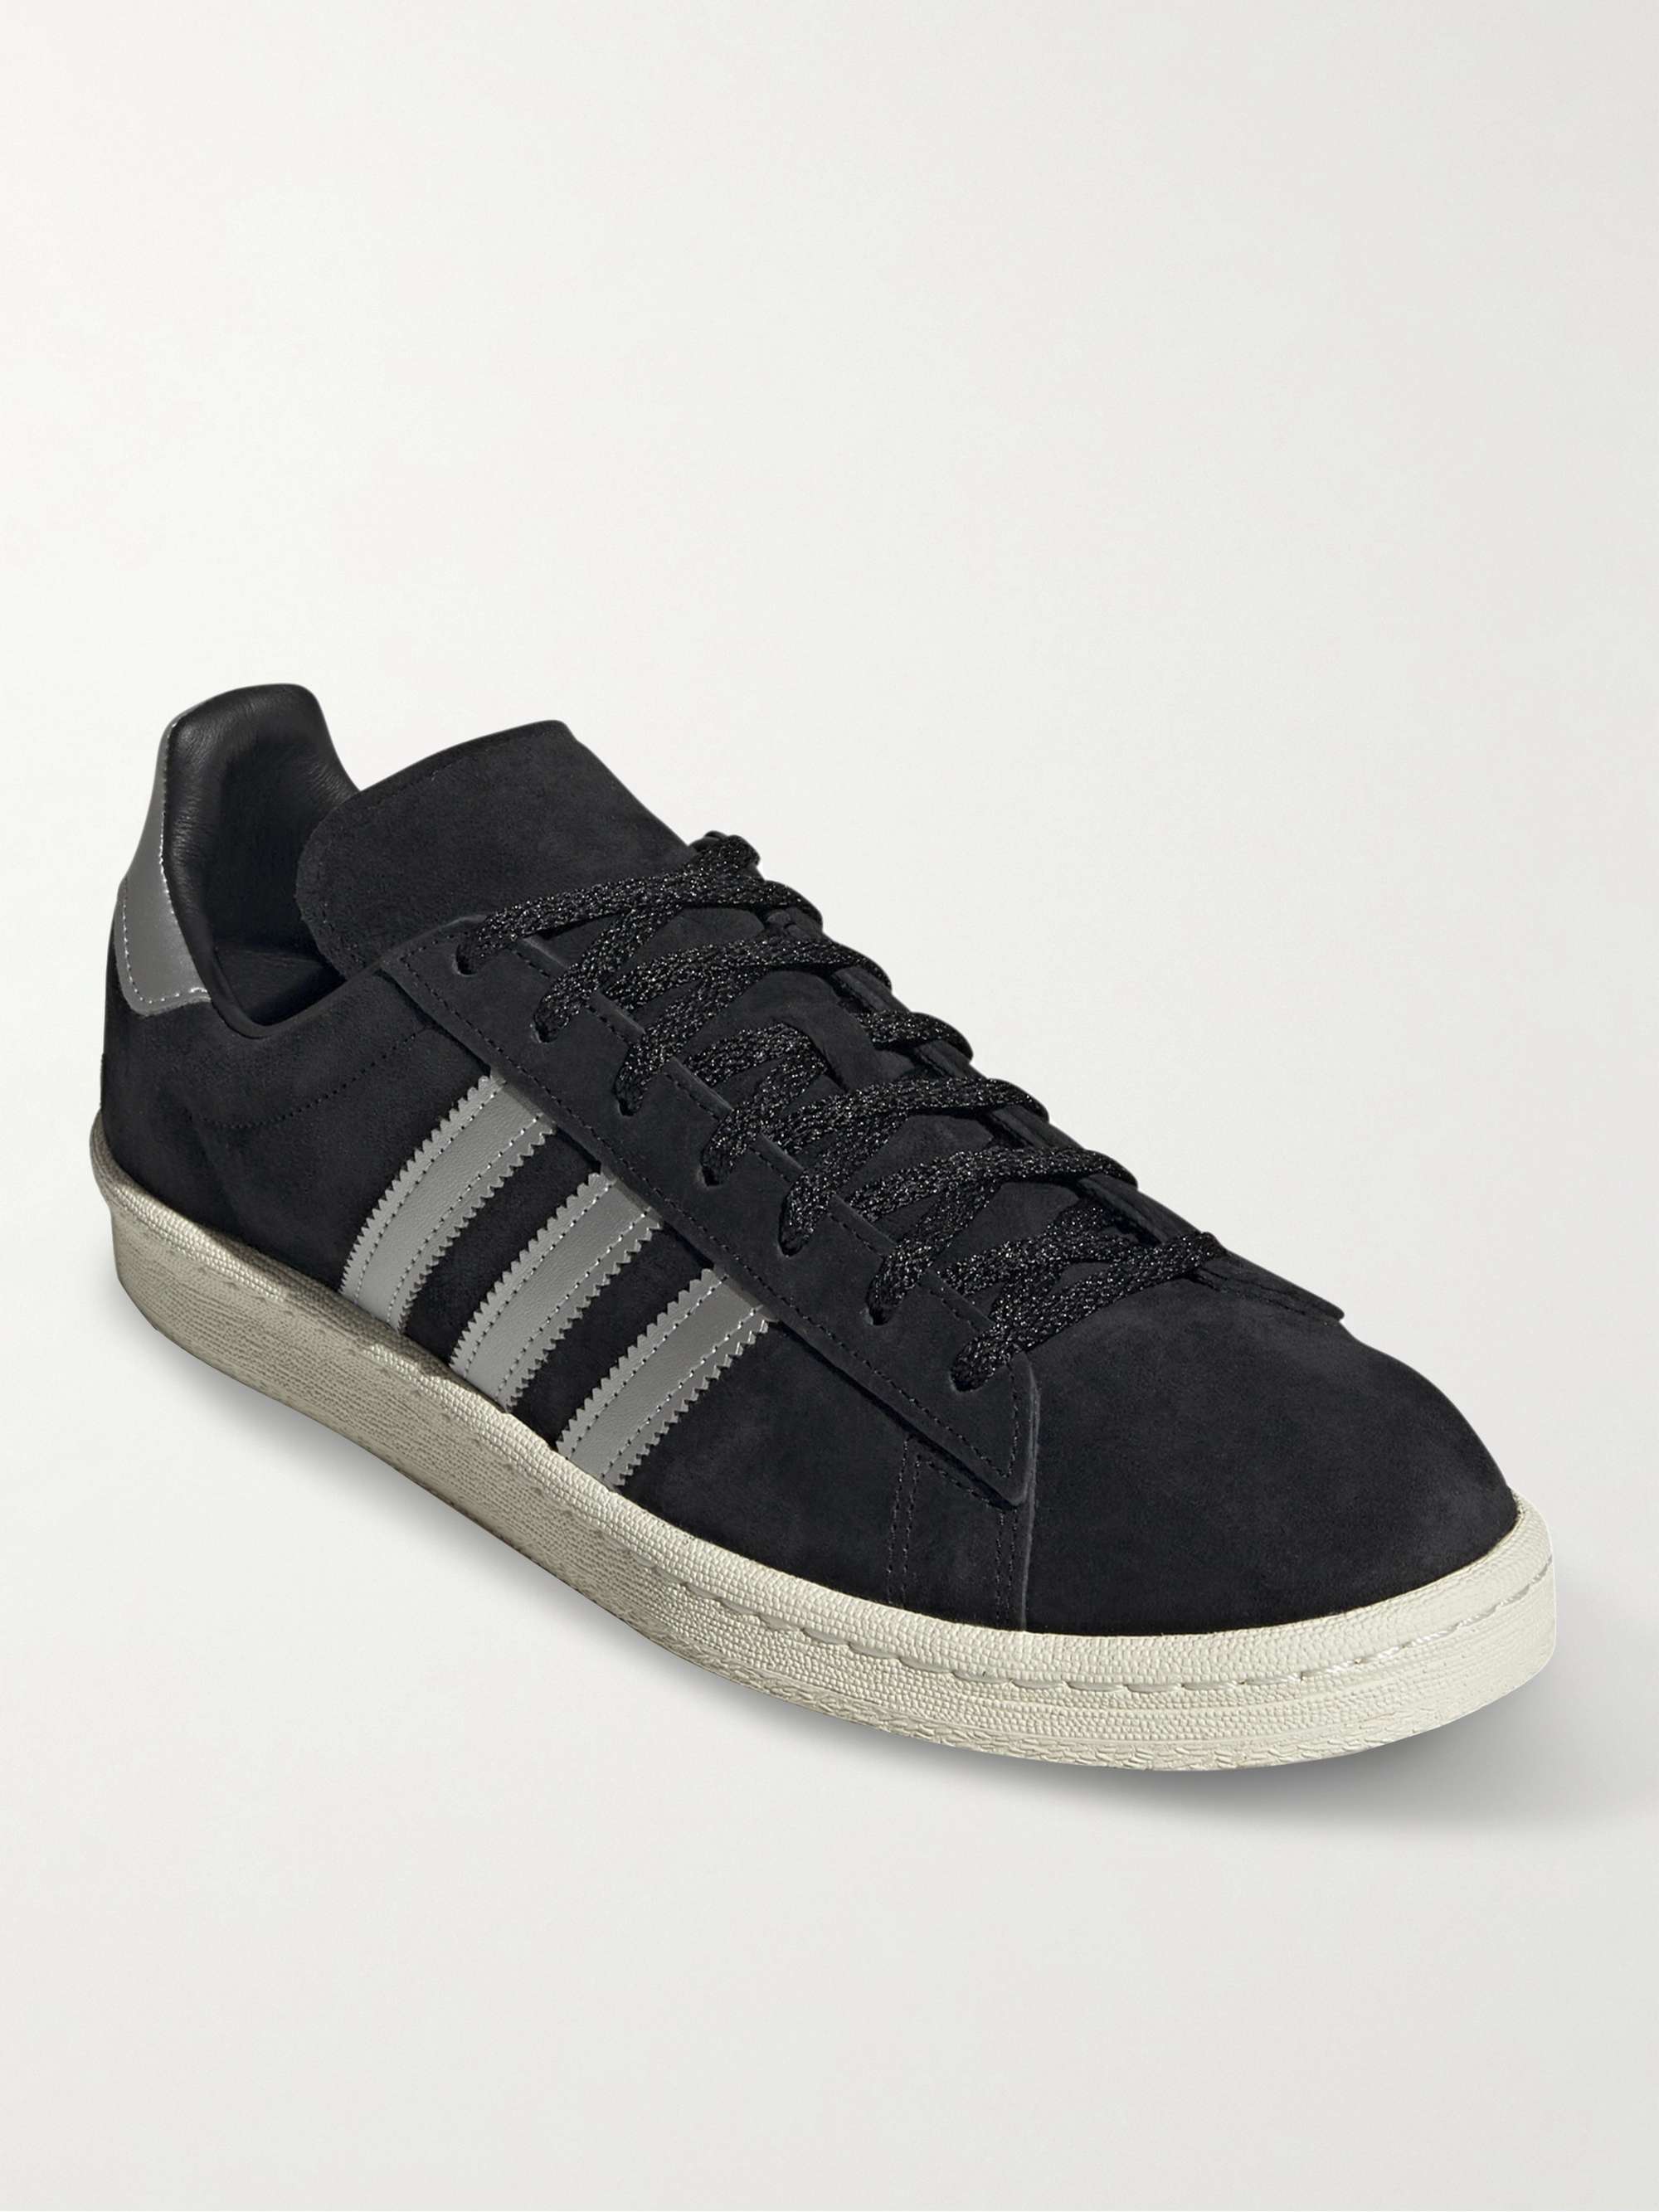 ADIDAS ORIGINALS Campus 80s Leather-Trimmed Suede Sneakers for Men